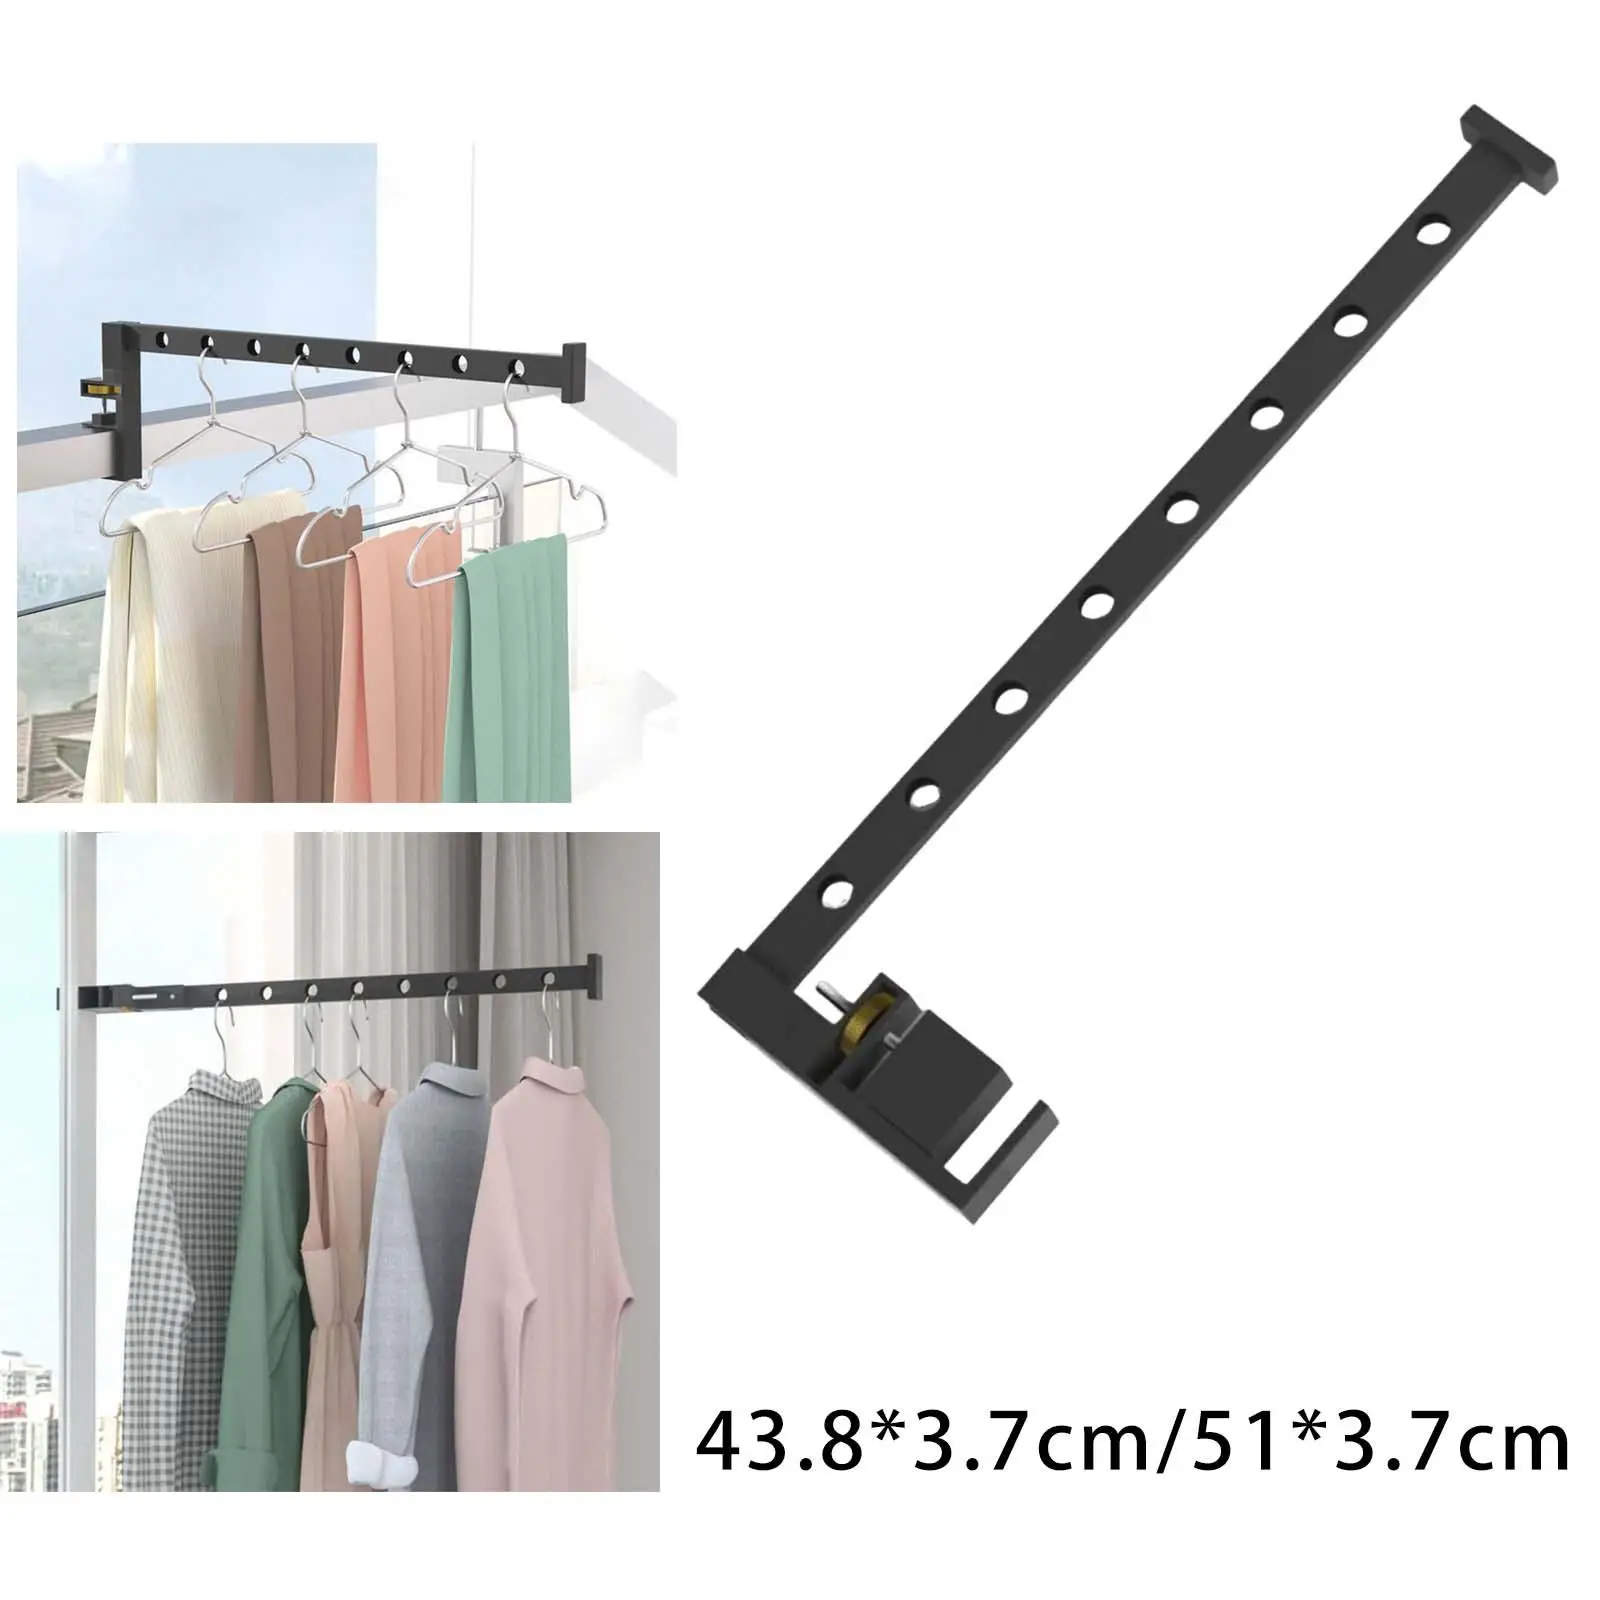 Drying Clothes Folding Clothes Hanger Collapsible Sturdy Durable Retractable Hook Wall Mounted Clothes Hanger for Window Jeans